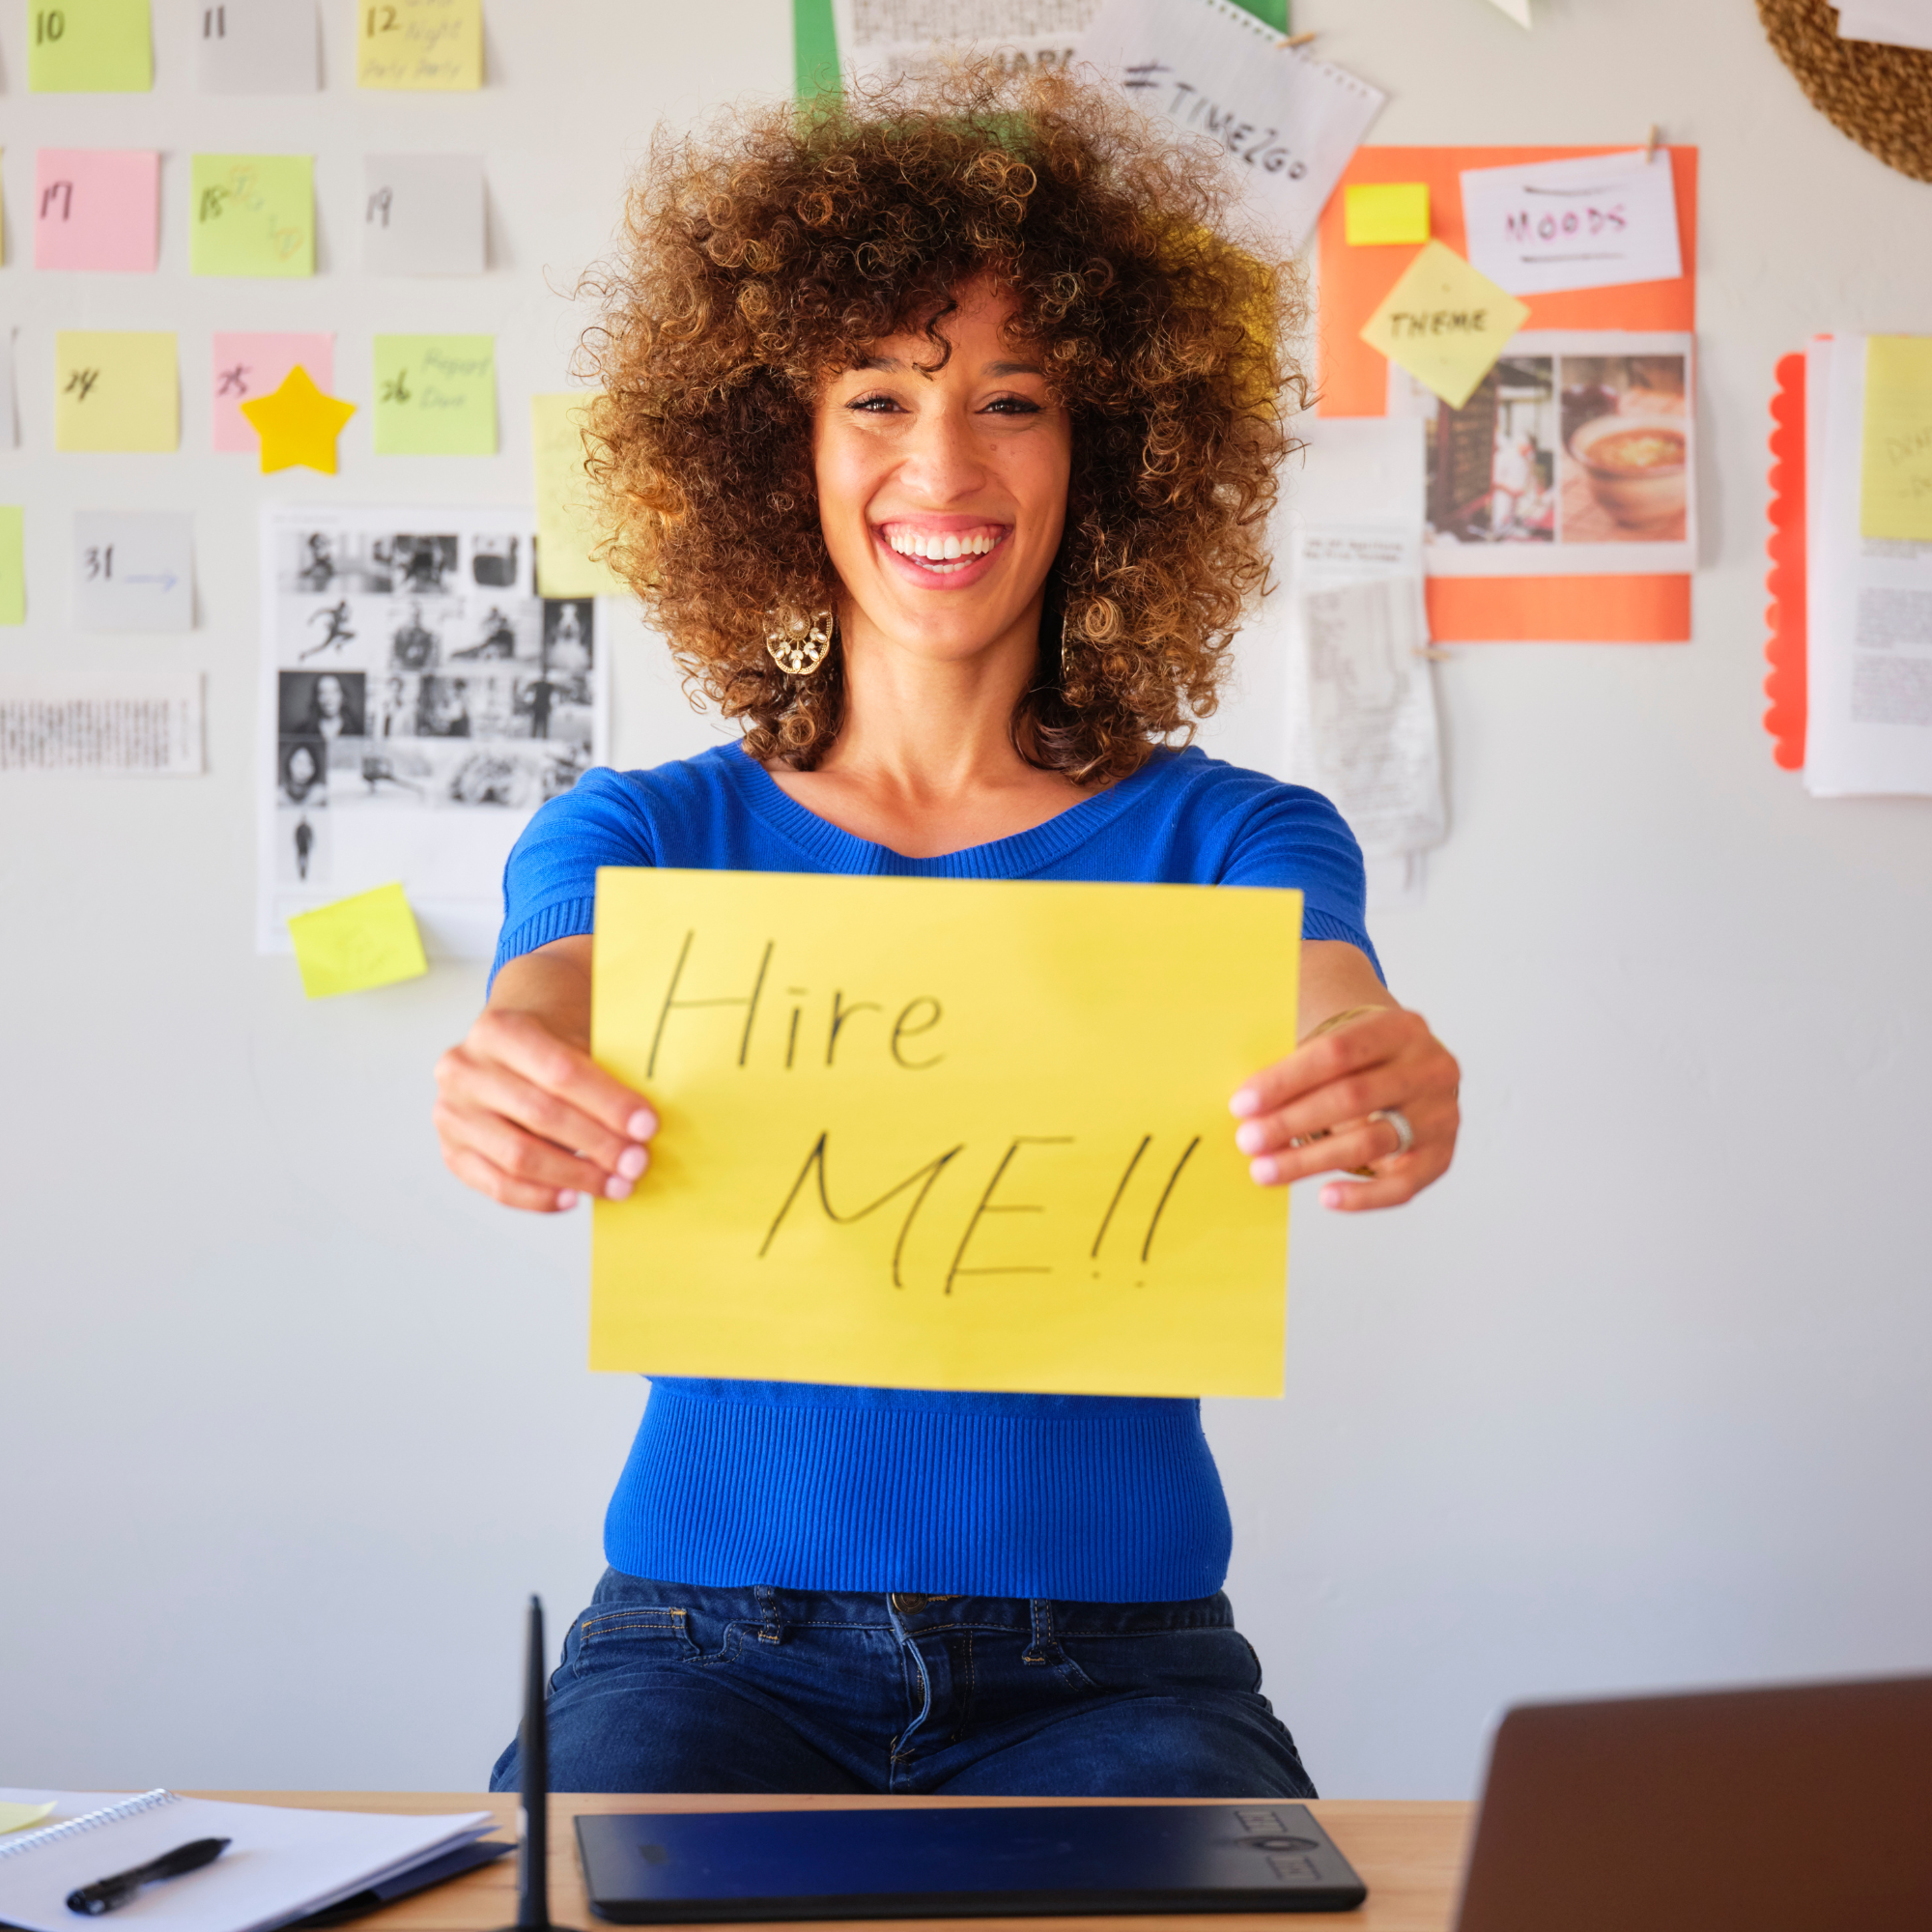 Image of a smiling woman in front of a wall holding a yellow sign that says "Hire Me!!" for the blog "5 Diversity Hiring Mistakes to Avoid When Interviewing Diverse Applicants"